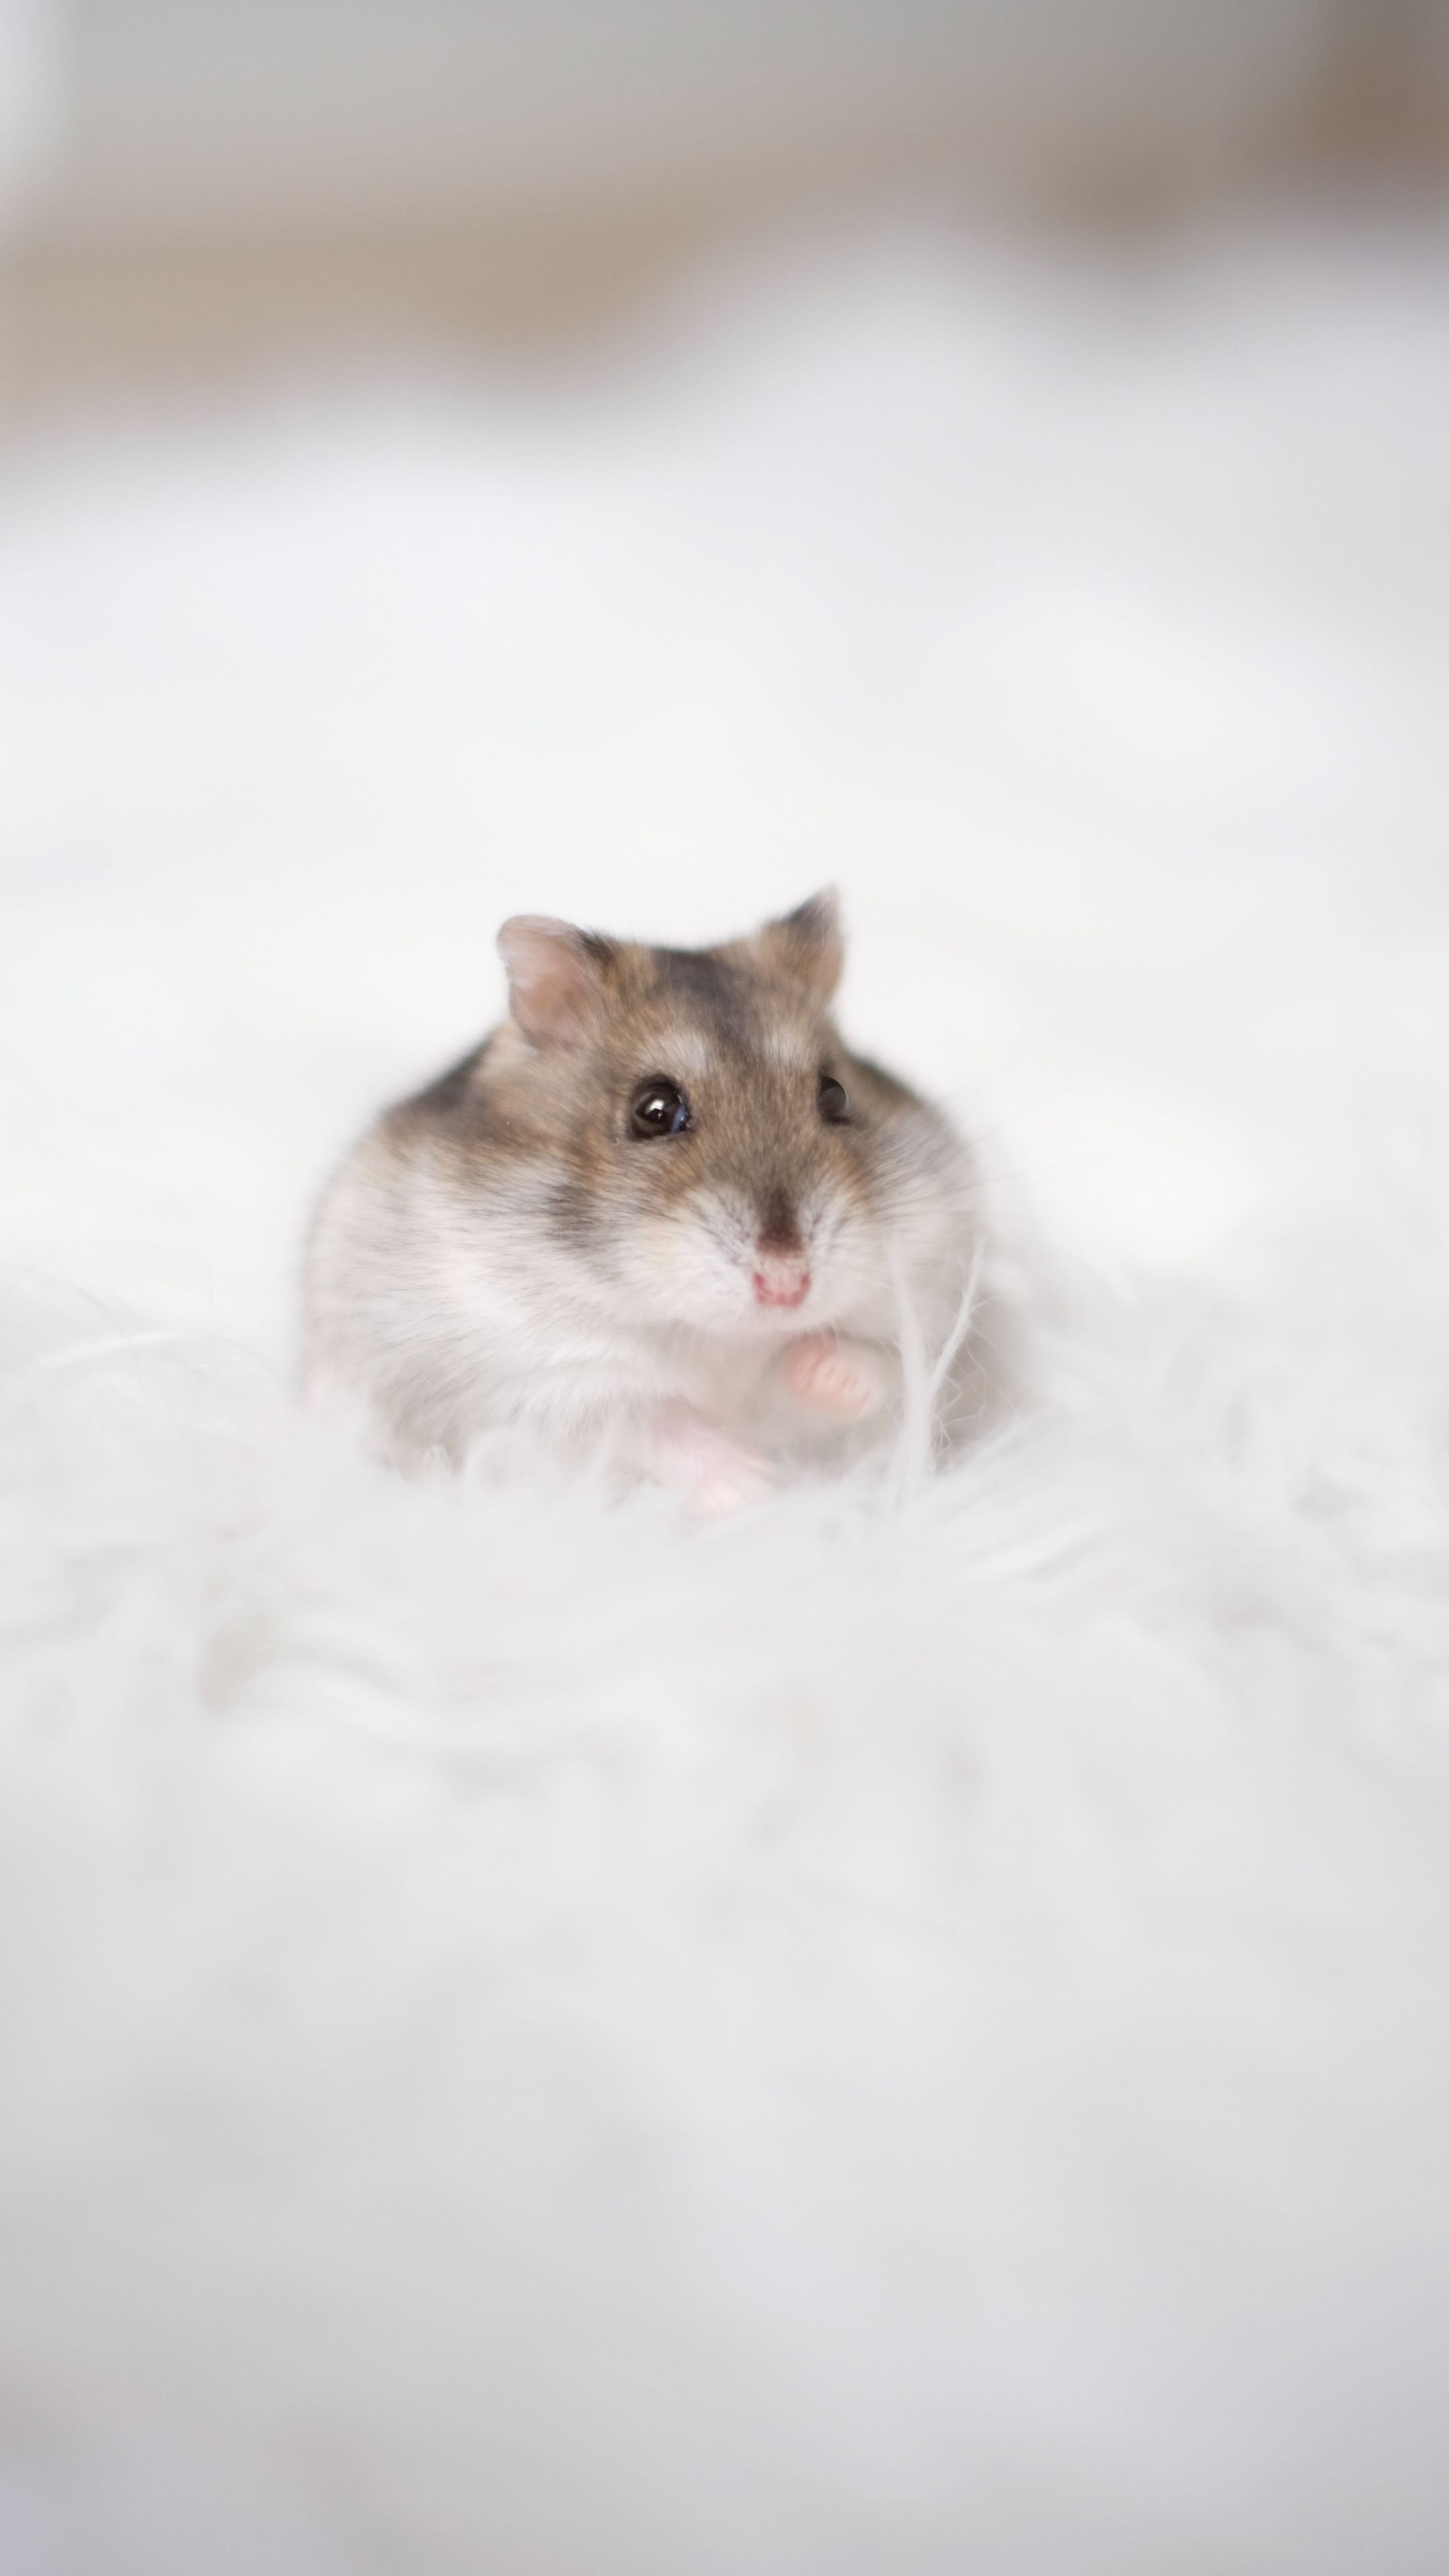 Cute hamster wallpapers, Hamster cuteness overload, Adorable and fluffy, Pet hamster, 2160x3840 4K Phone